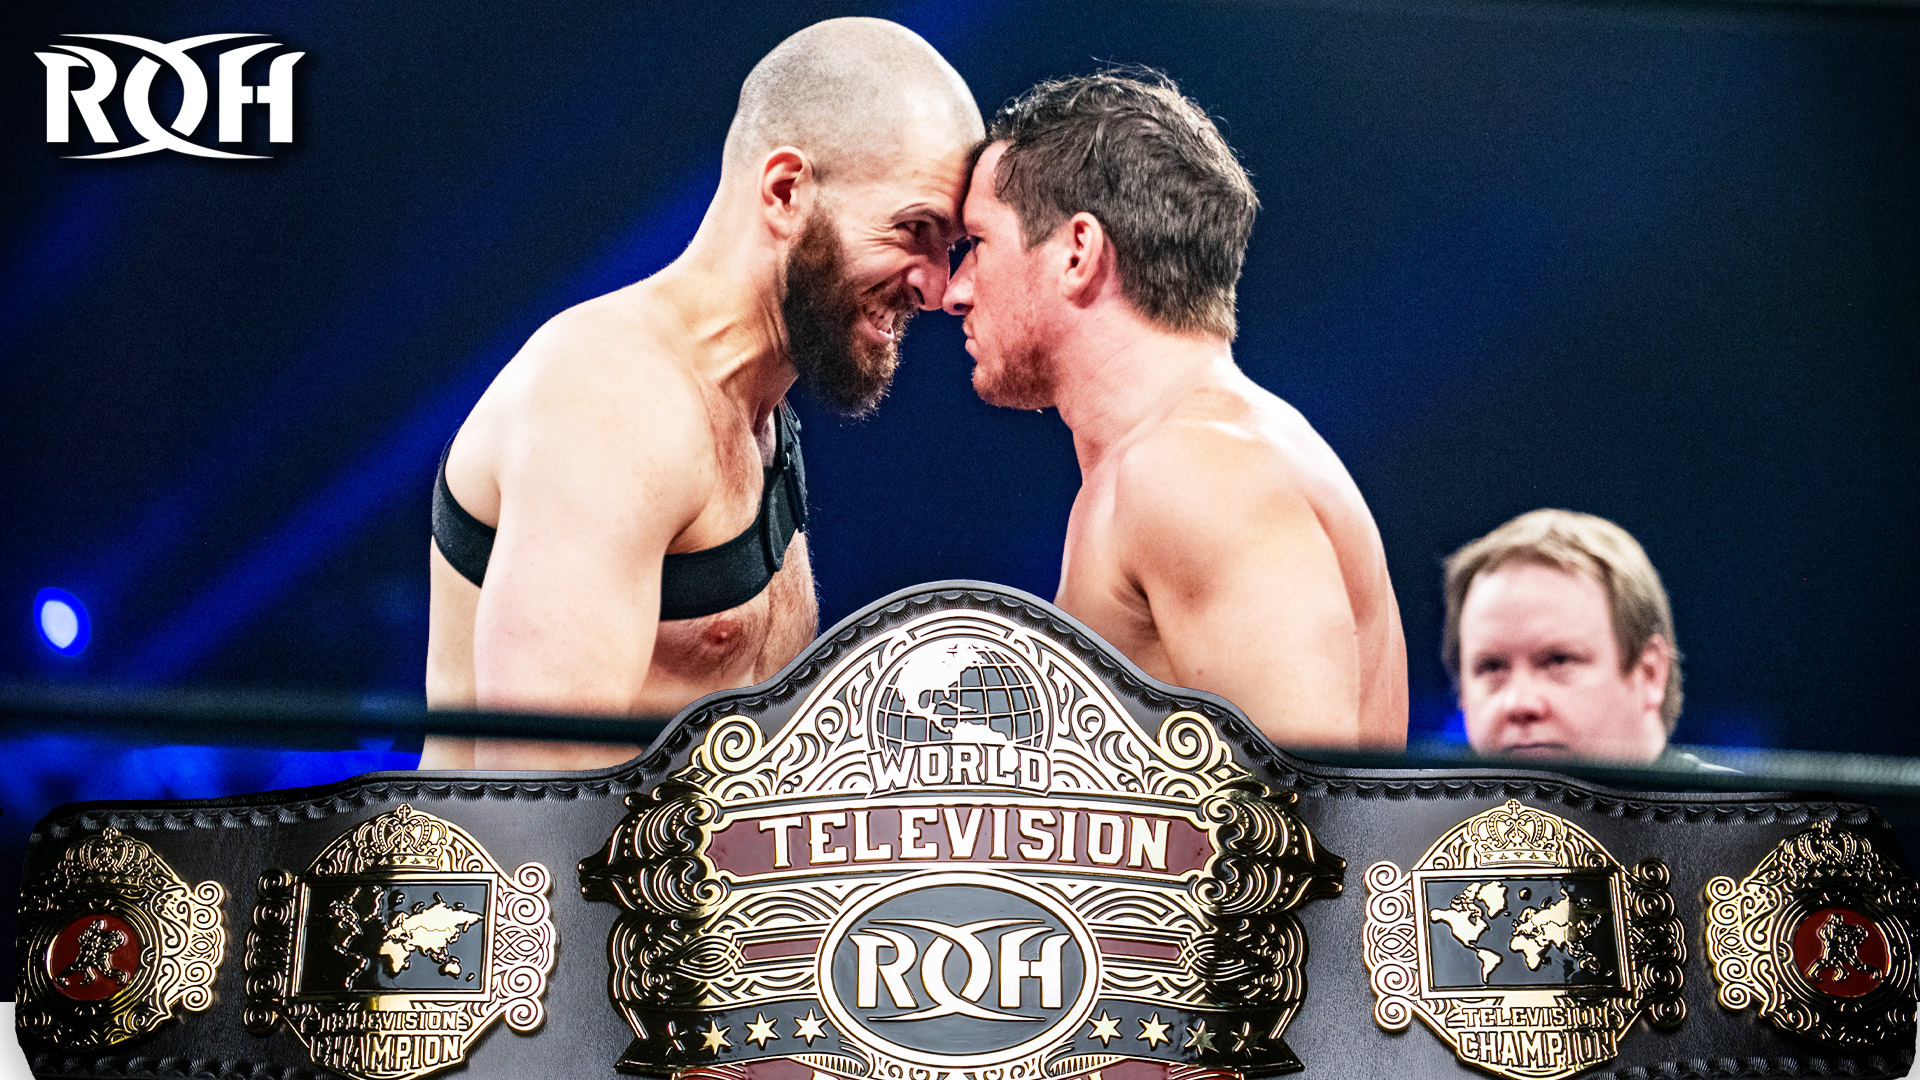 Watch: Tony Deppen vs Tracy Williams in Full – for the Ring of Honor World Television Championship – Premieres tonight at 7 p.m. EASTERN